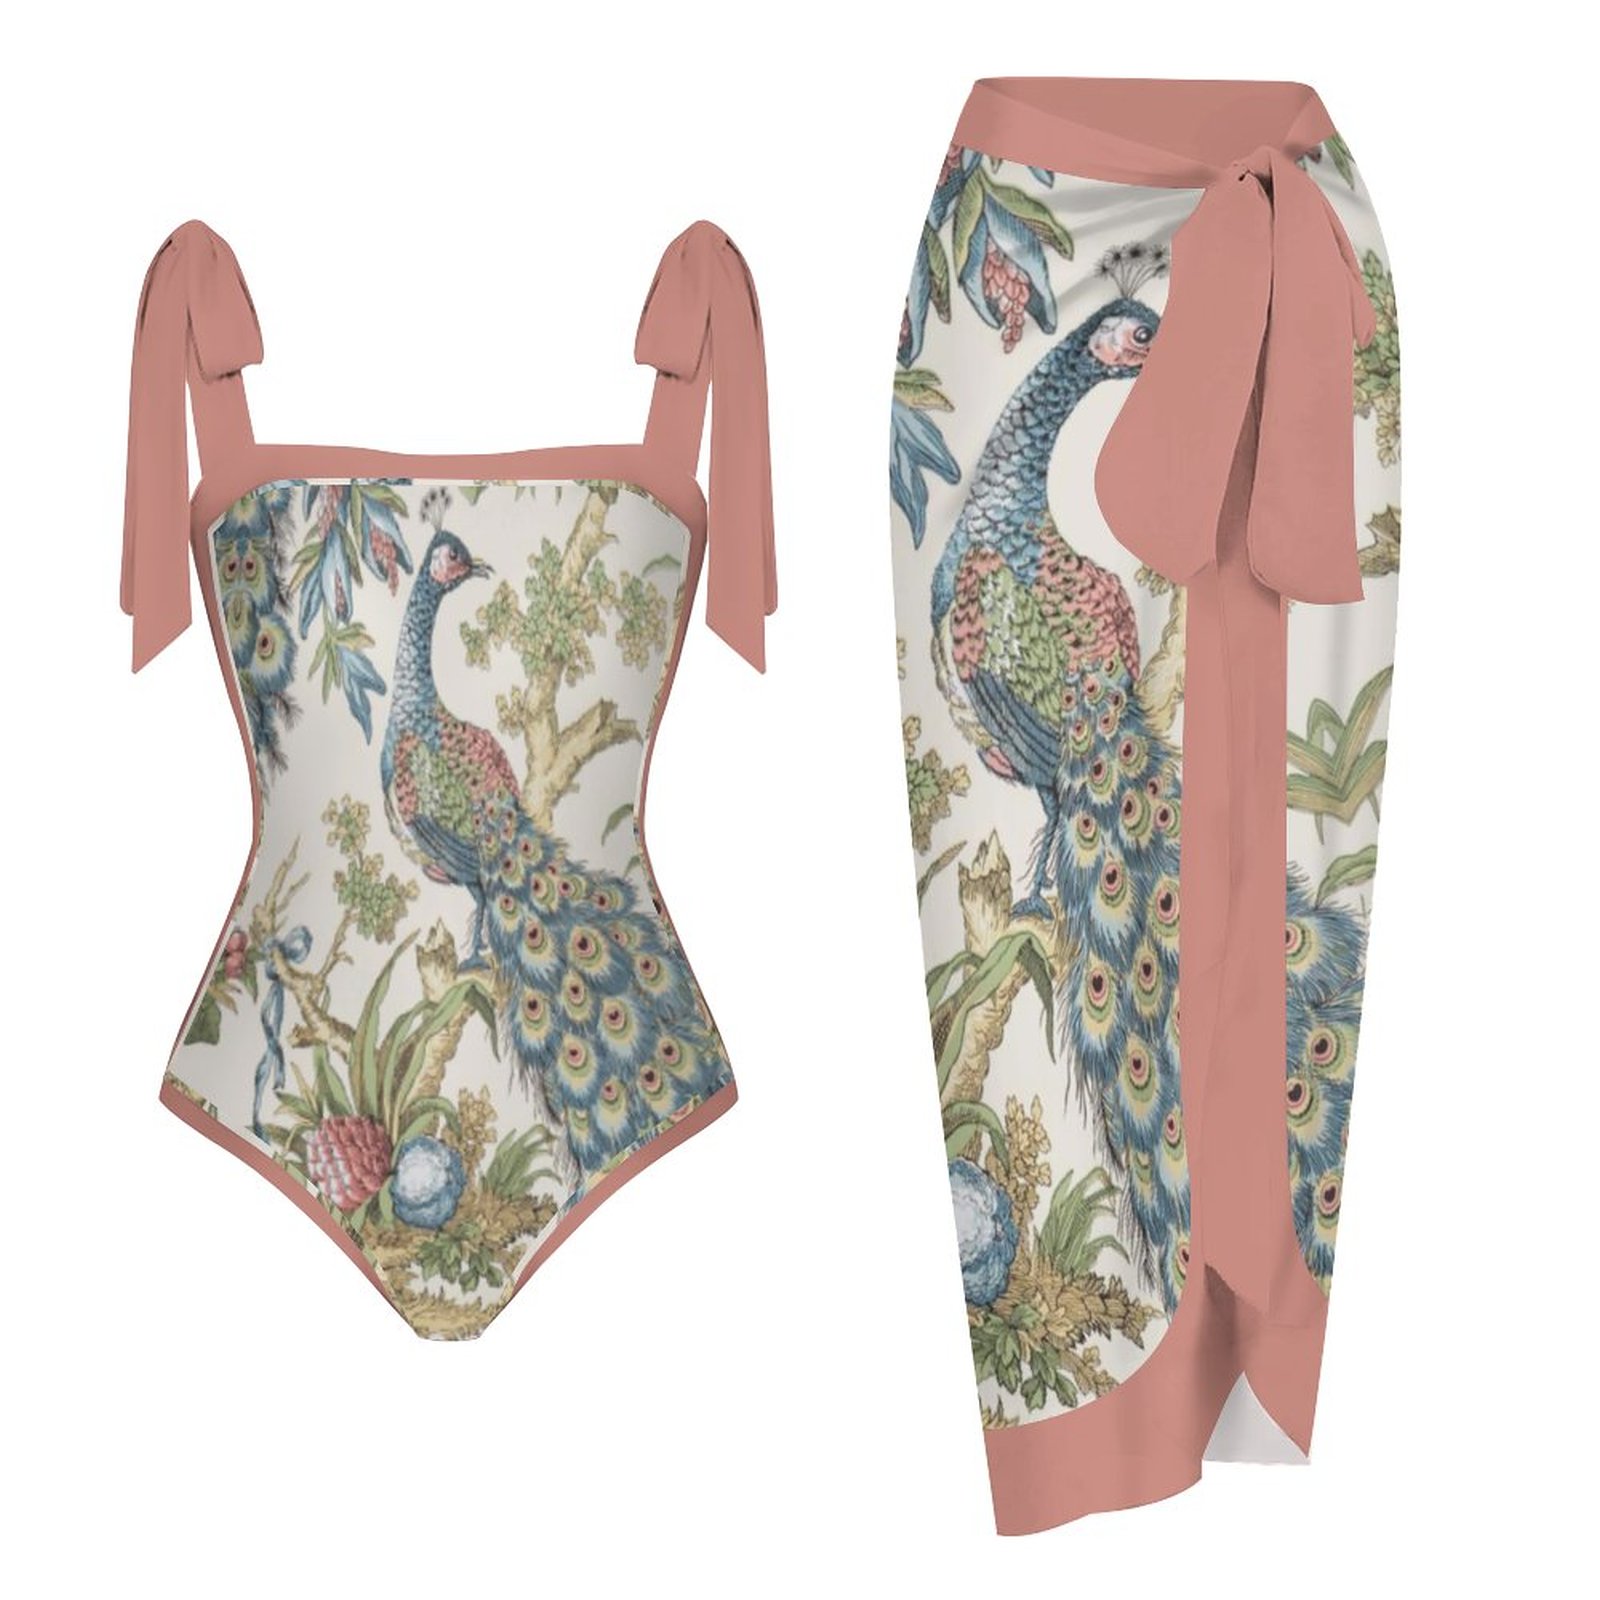 Fashion Printed One-Piece Swimsuit And Cover Up